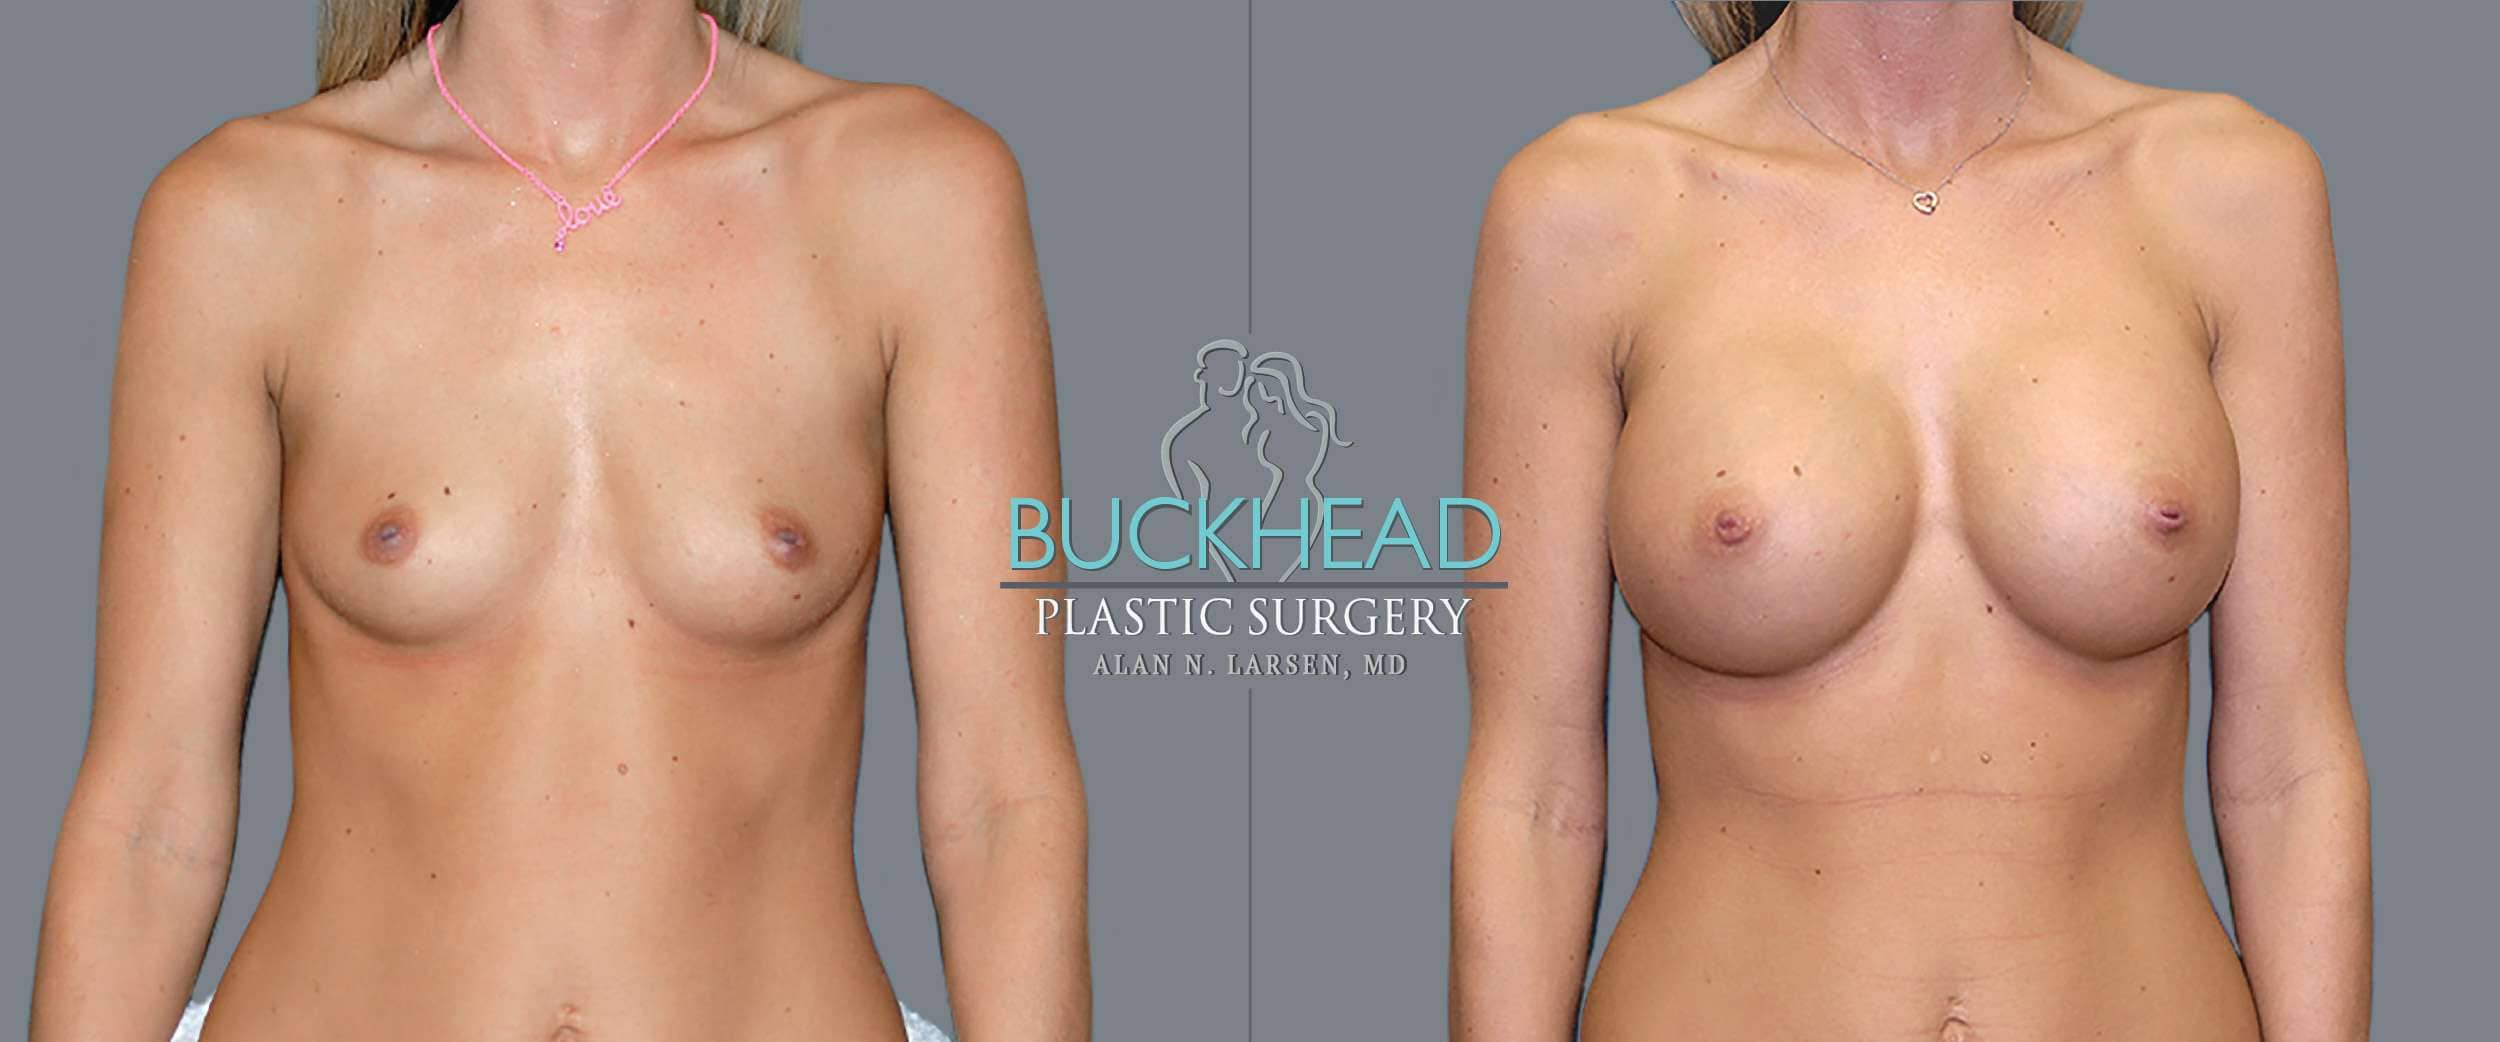 Before and After Photo gallery | Breast Augmentation | Buckhead Plastic Surgery | Board-Certified Plastic Surgeon in Atlanta GA